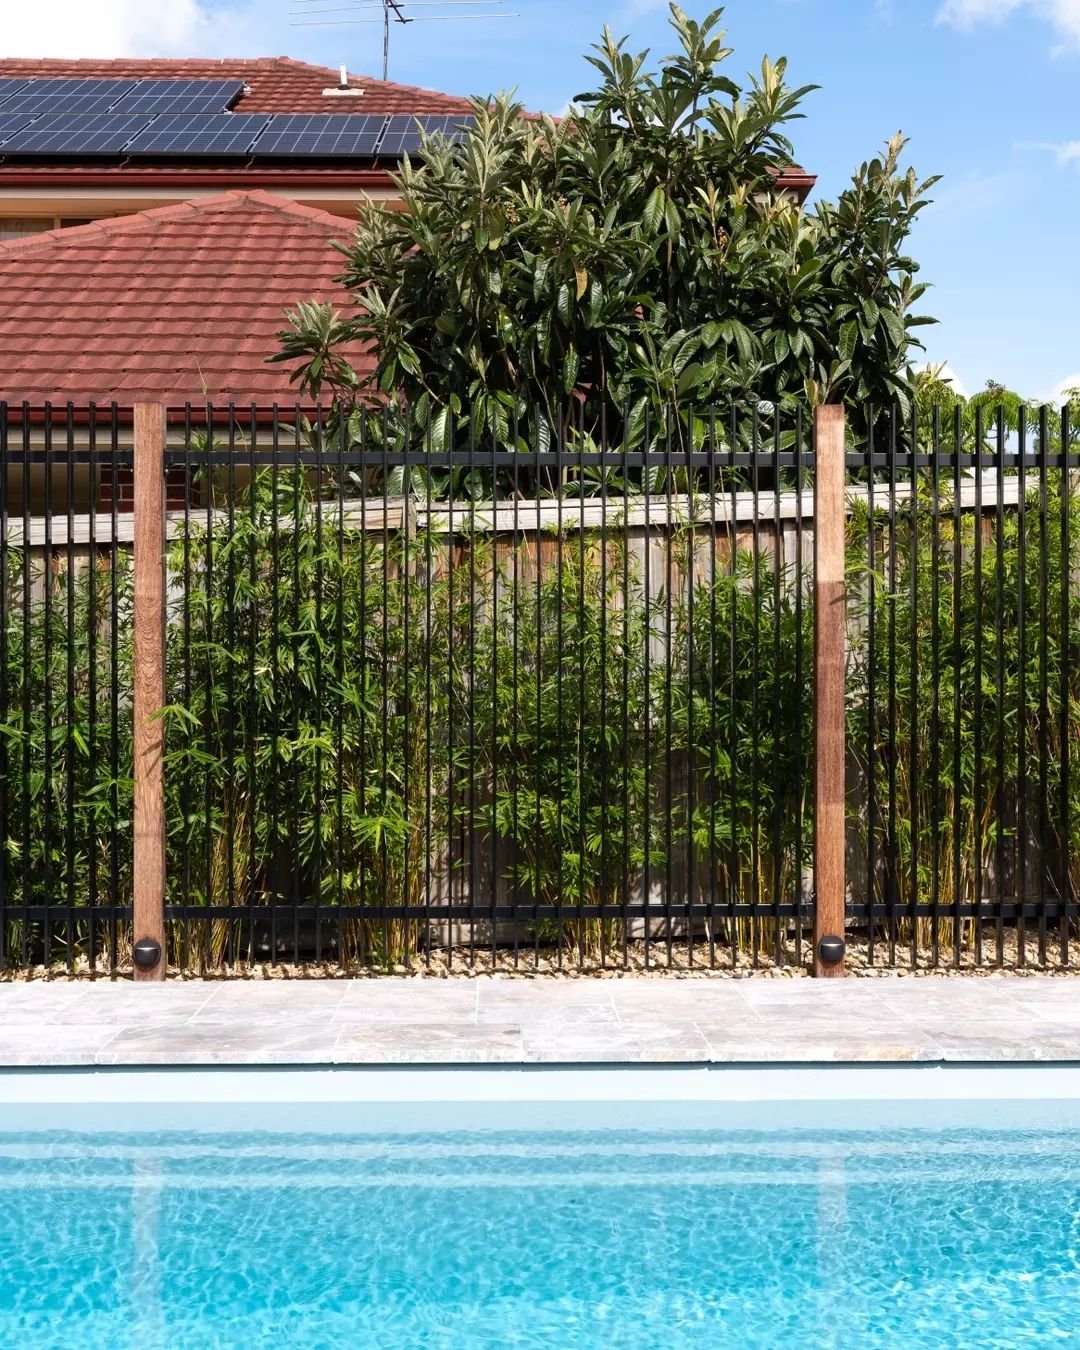 Give this space a few weeks, and there will be a green and luscious bamboo screen creating privacy for these clients' backyard🌿

Pool shell @bombora_pools 
Valas Marble @artisanexterior.au

 #techscapes #landscper #sydneylandscaper #backyard #pool #